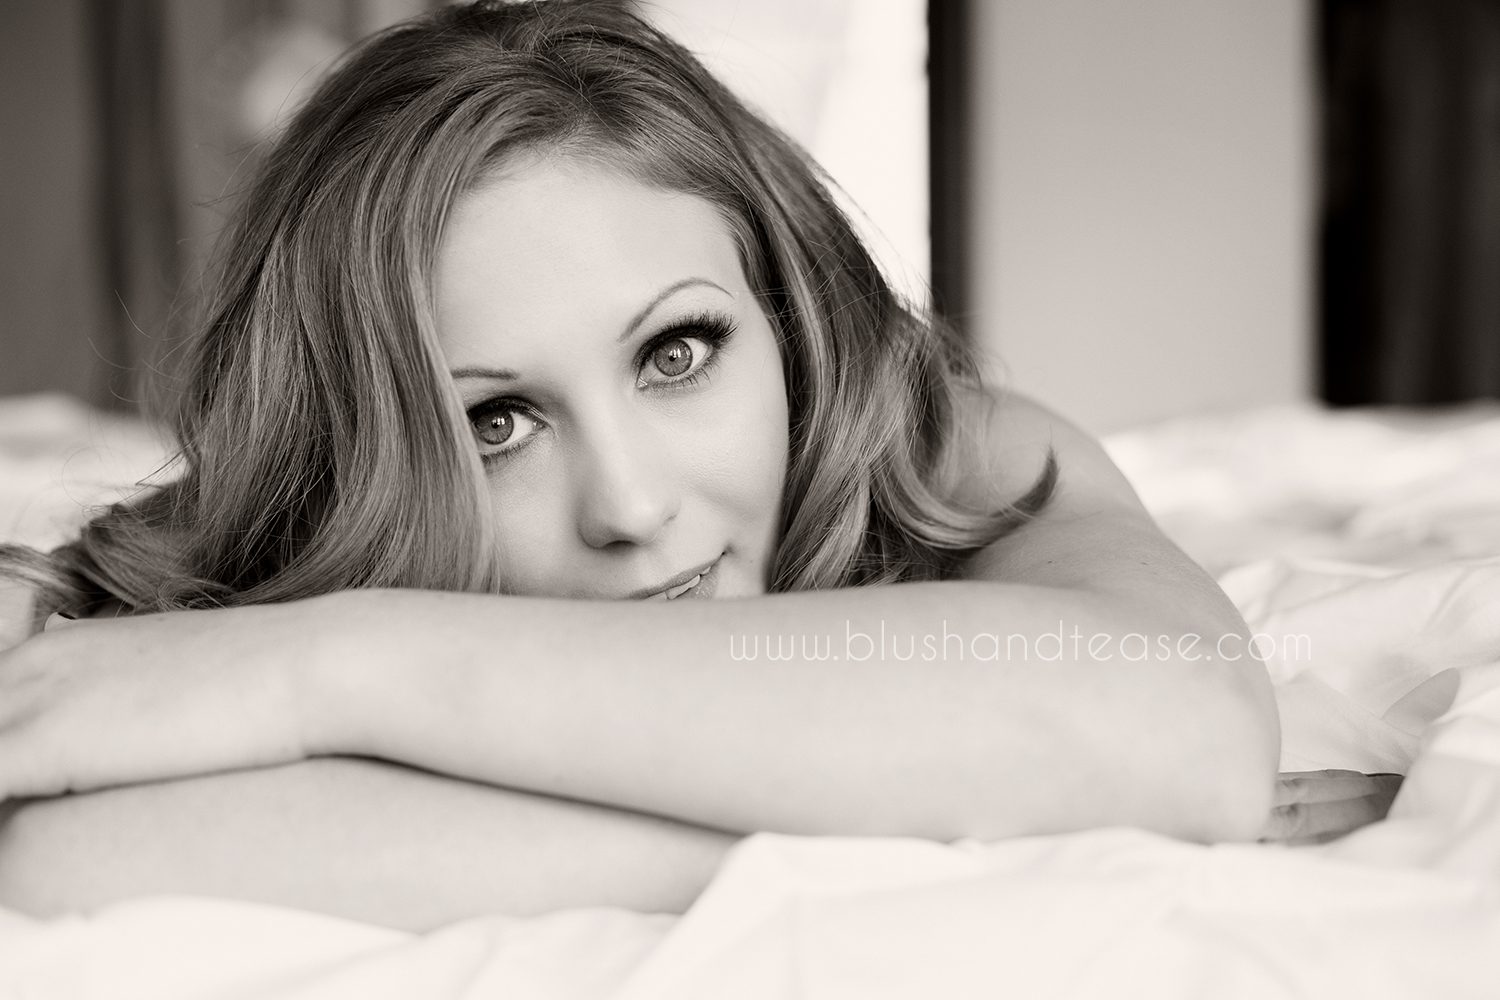 Behind The Scenes Denver Boudoir Photography Blush And Tease 